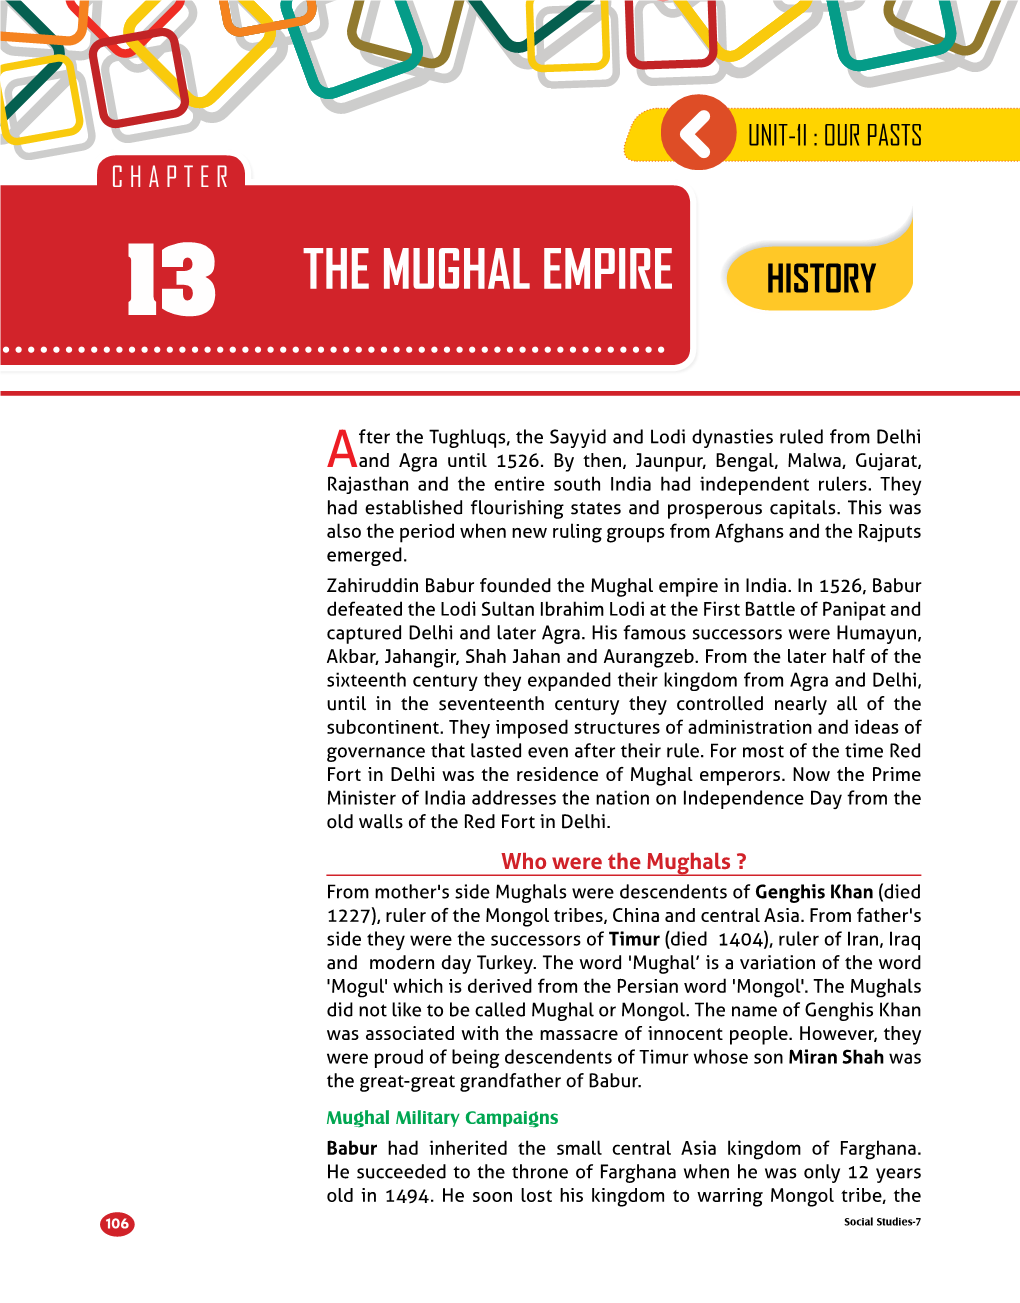 The Mughal Empire History